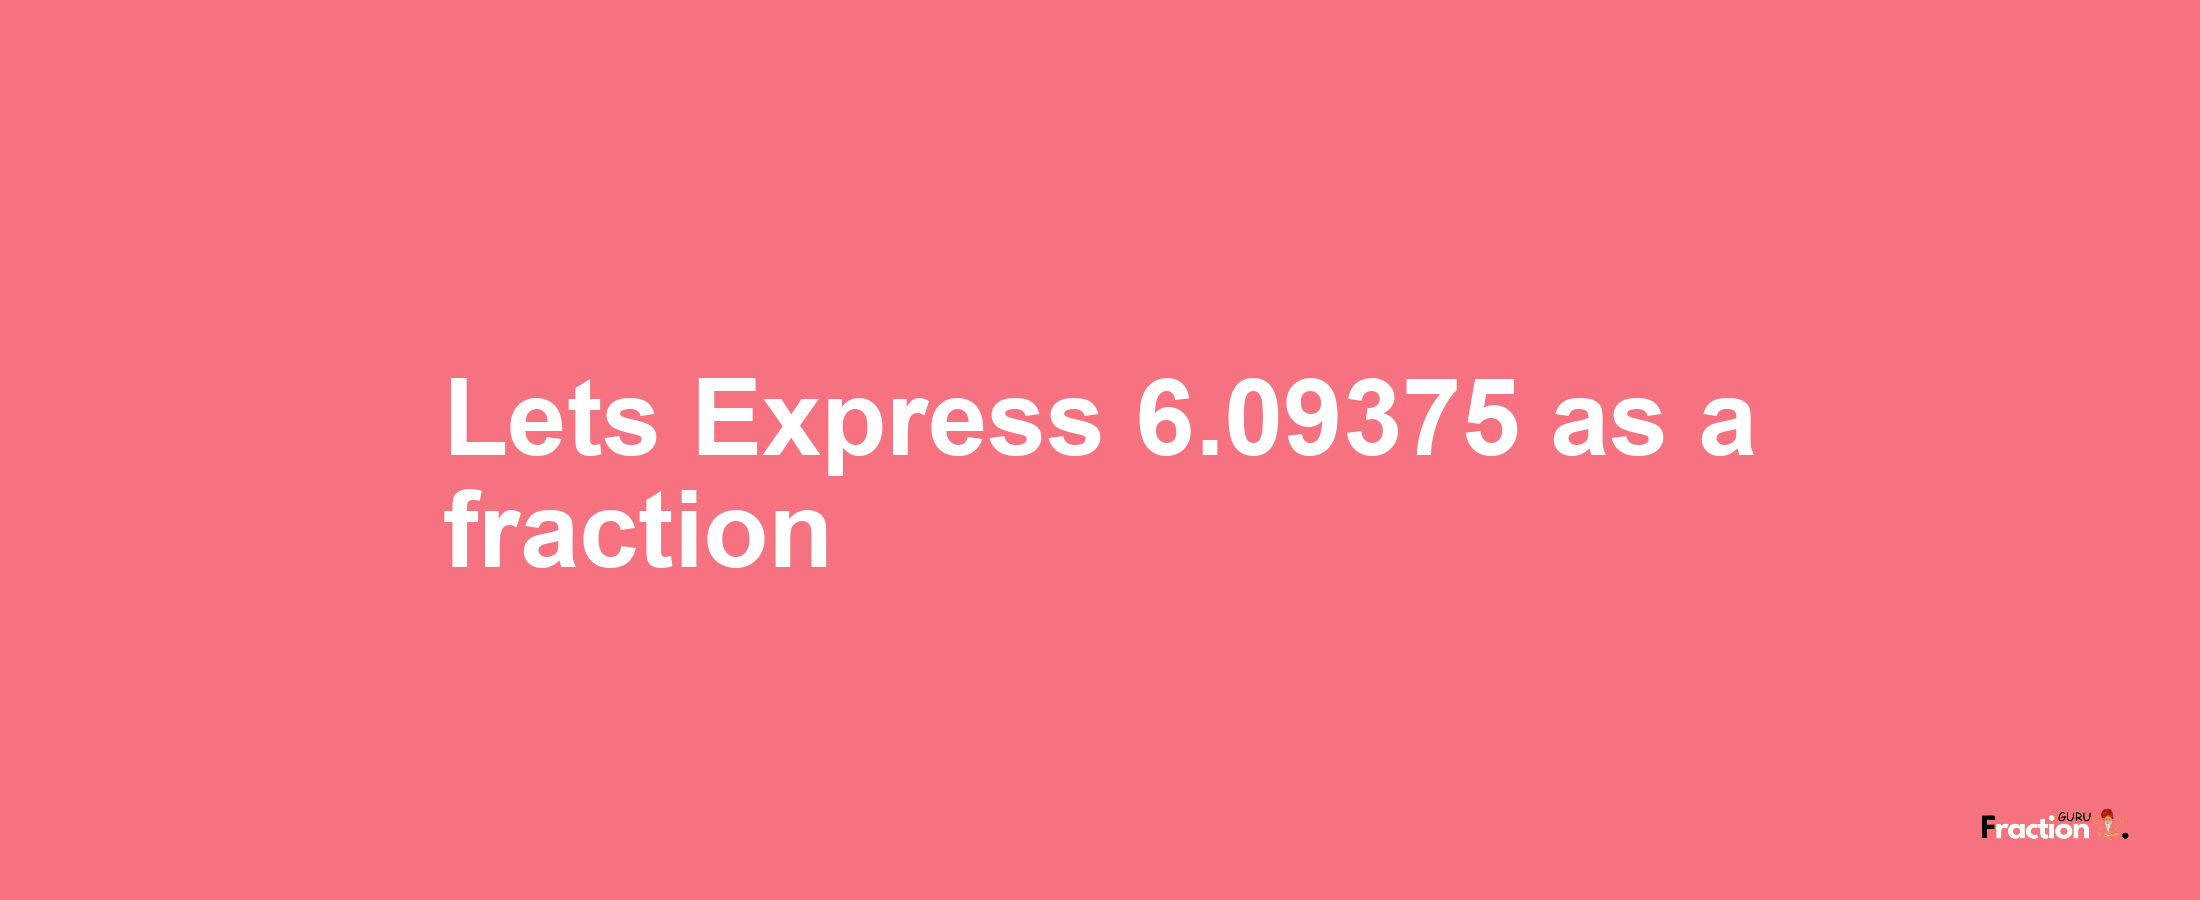 Lets Express 6.09375 as afraction